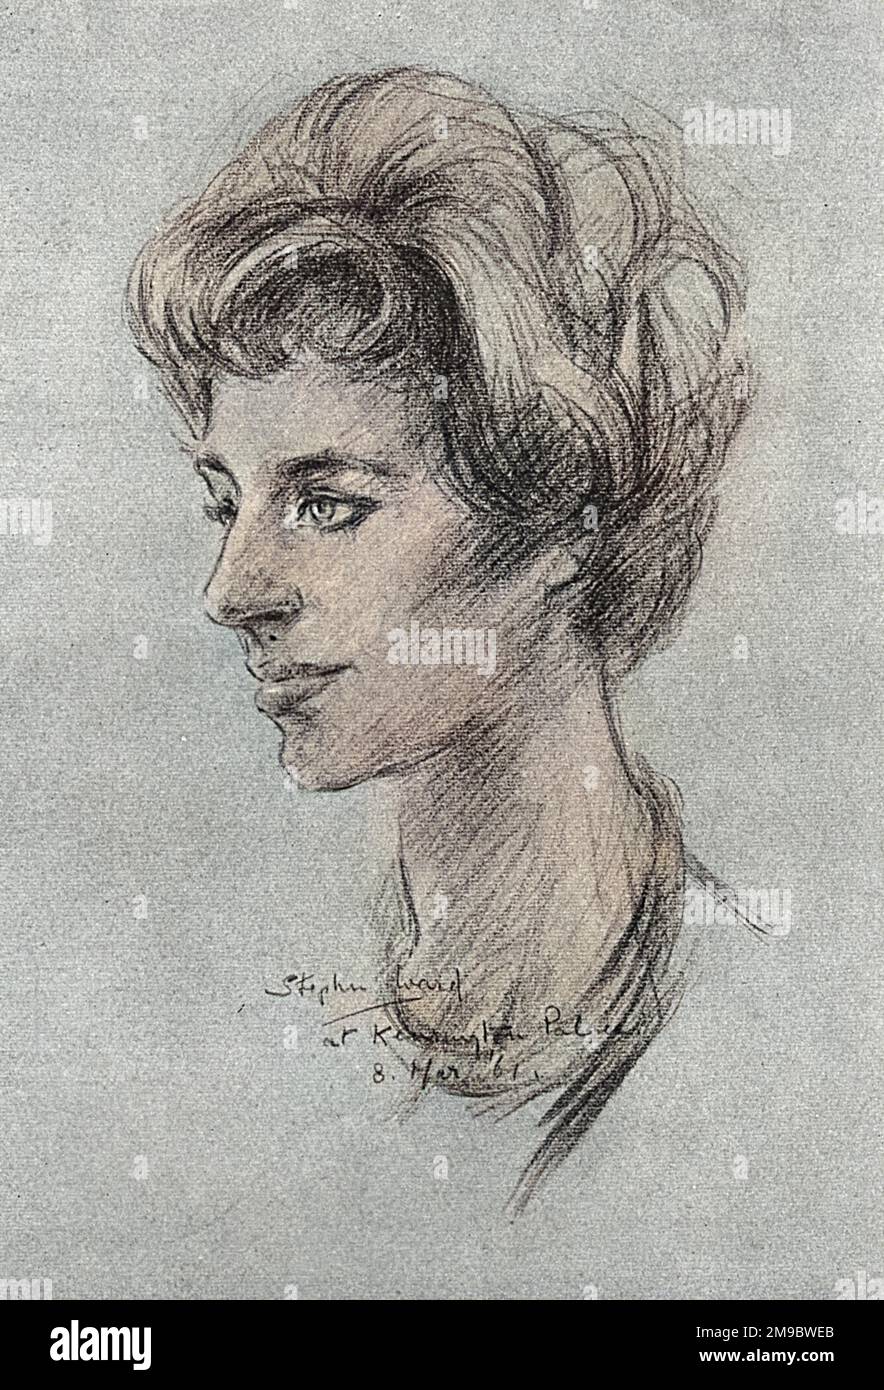 Princess Margaret(1930-2002), as drawn from life by Stephen Ward, at a sitting specially granted to the Illustrated London News in 1961. Ward sketched several high profile figures for the Illustrated London News in 1961, but two years later he would become notorious through his involvement in the Profumo Affair. Stock Photo